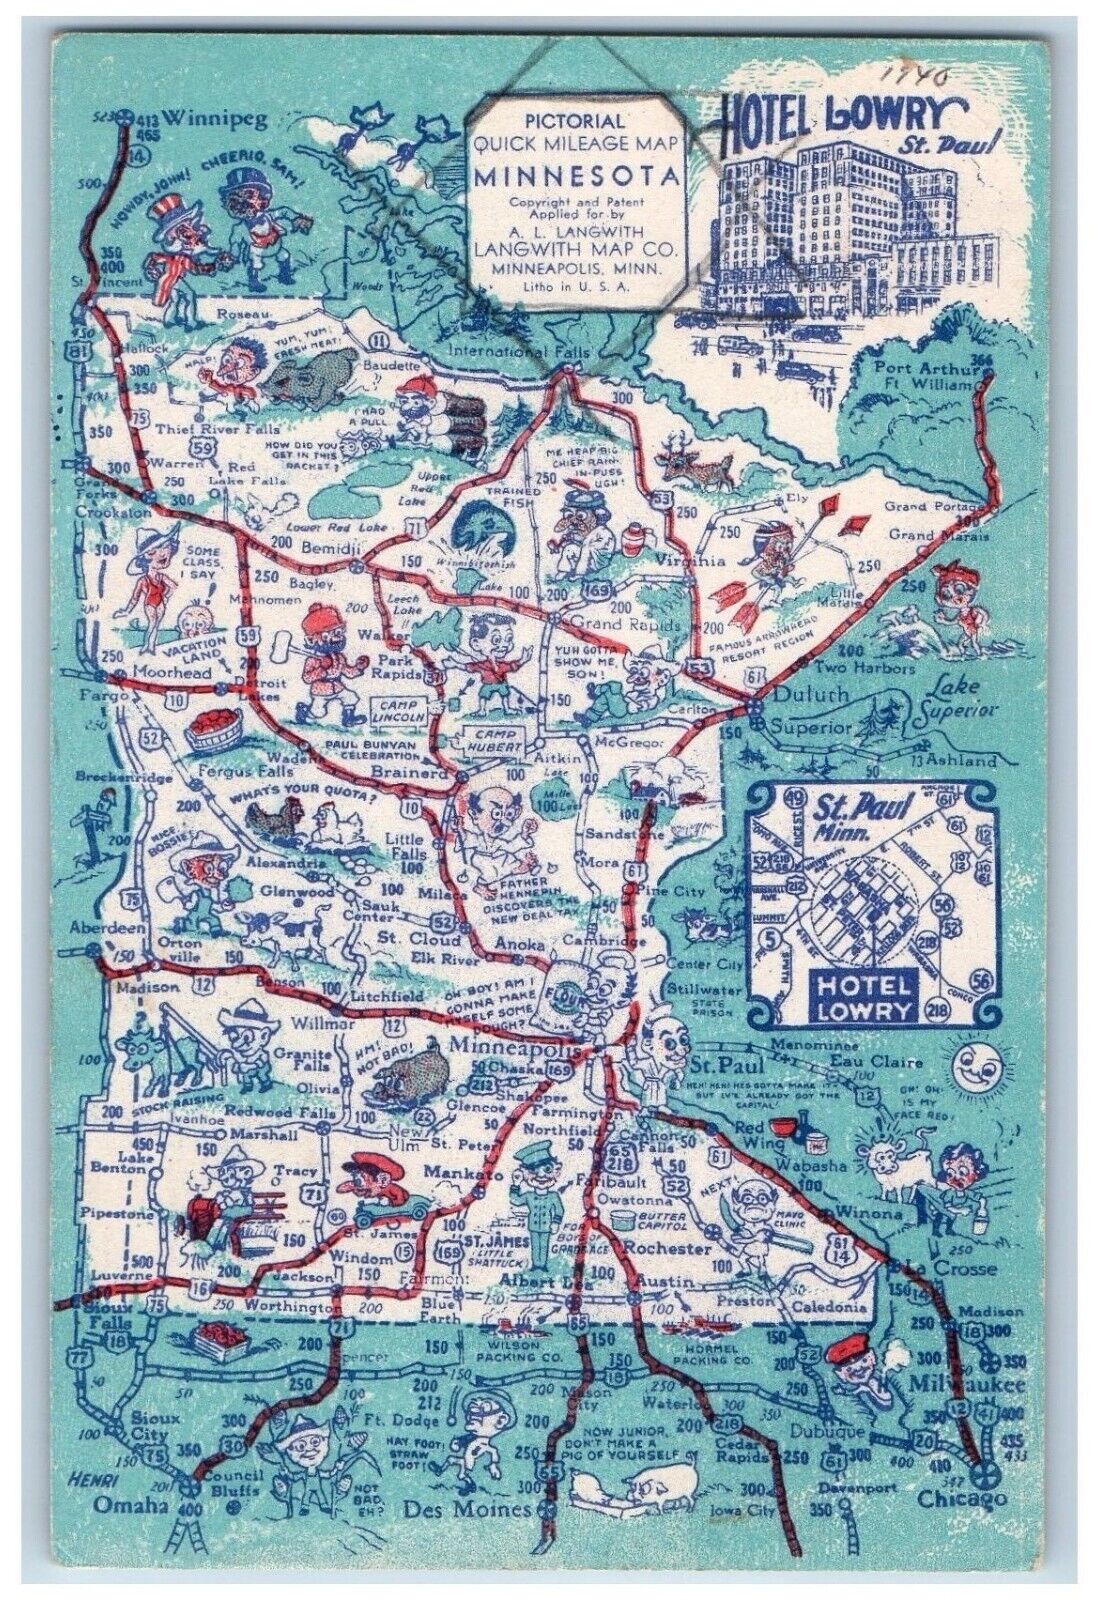 Minneapolis Minnesota Postcard Pictorial Quick Mileage Map Langwith 1940 Vintage